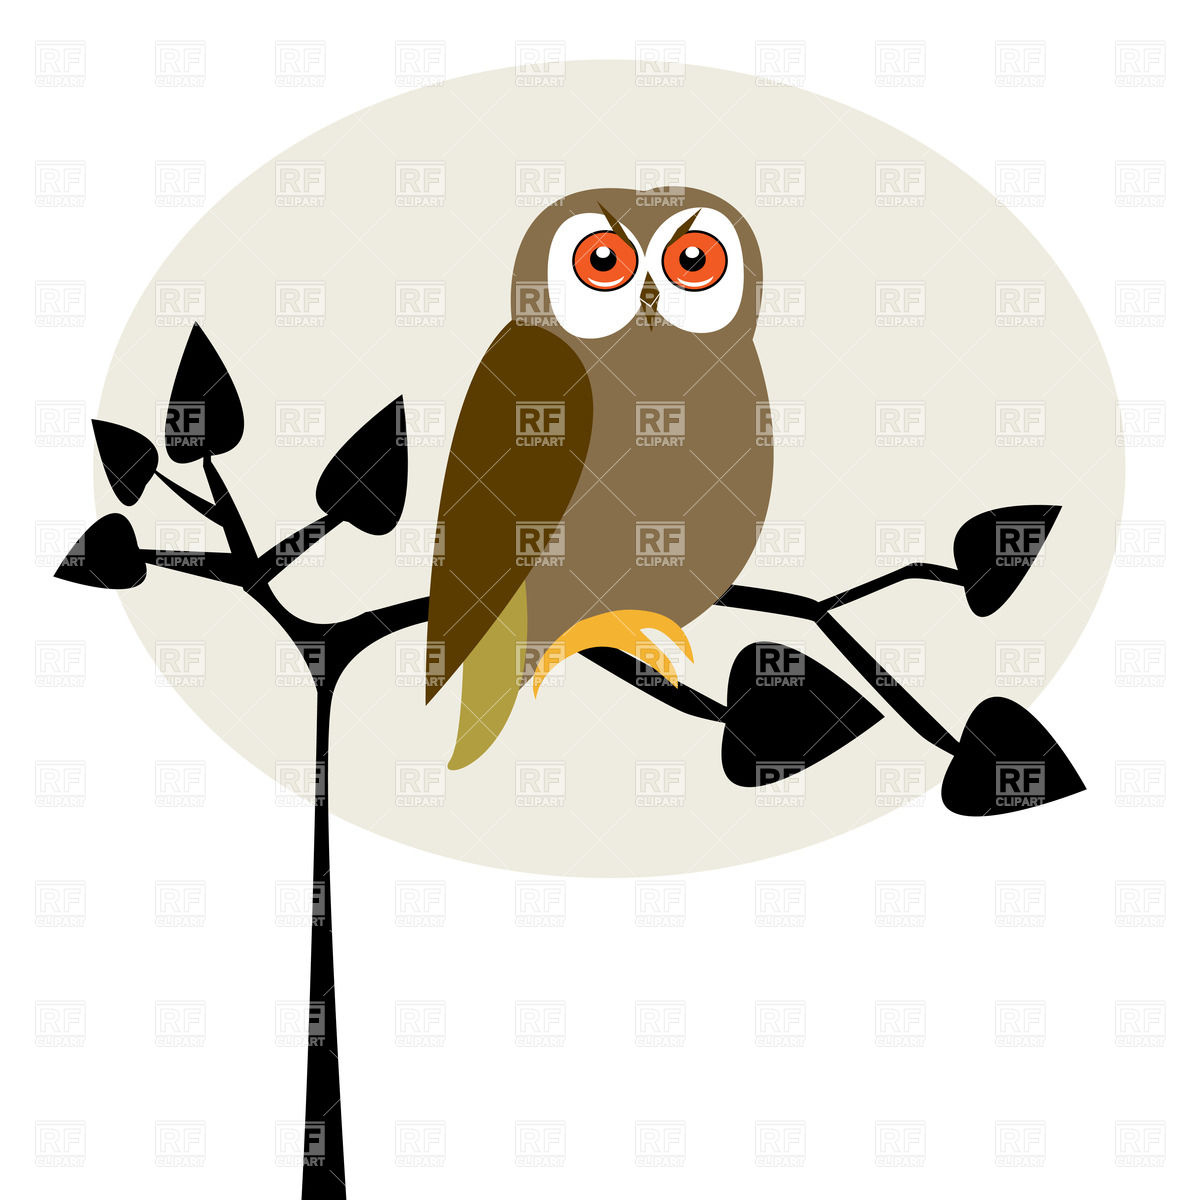 Funny Owl On Tree Download Royalty Free Vector Clipart  Eps